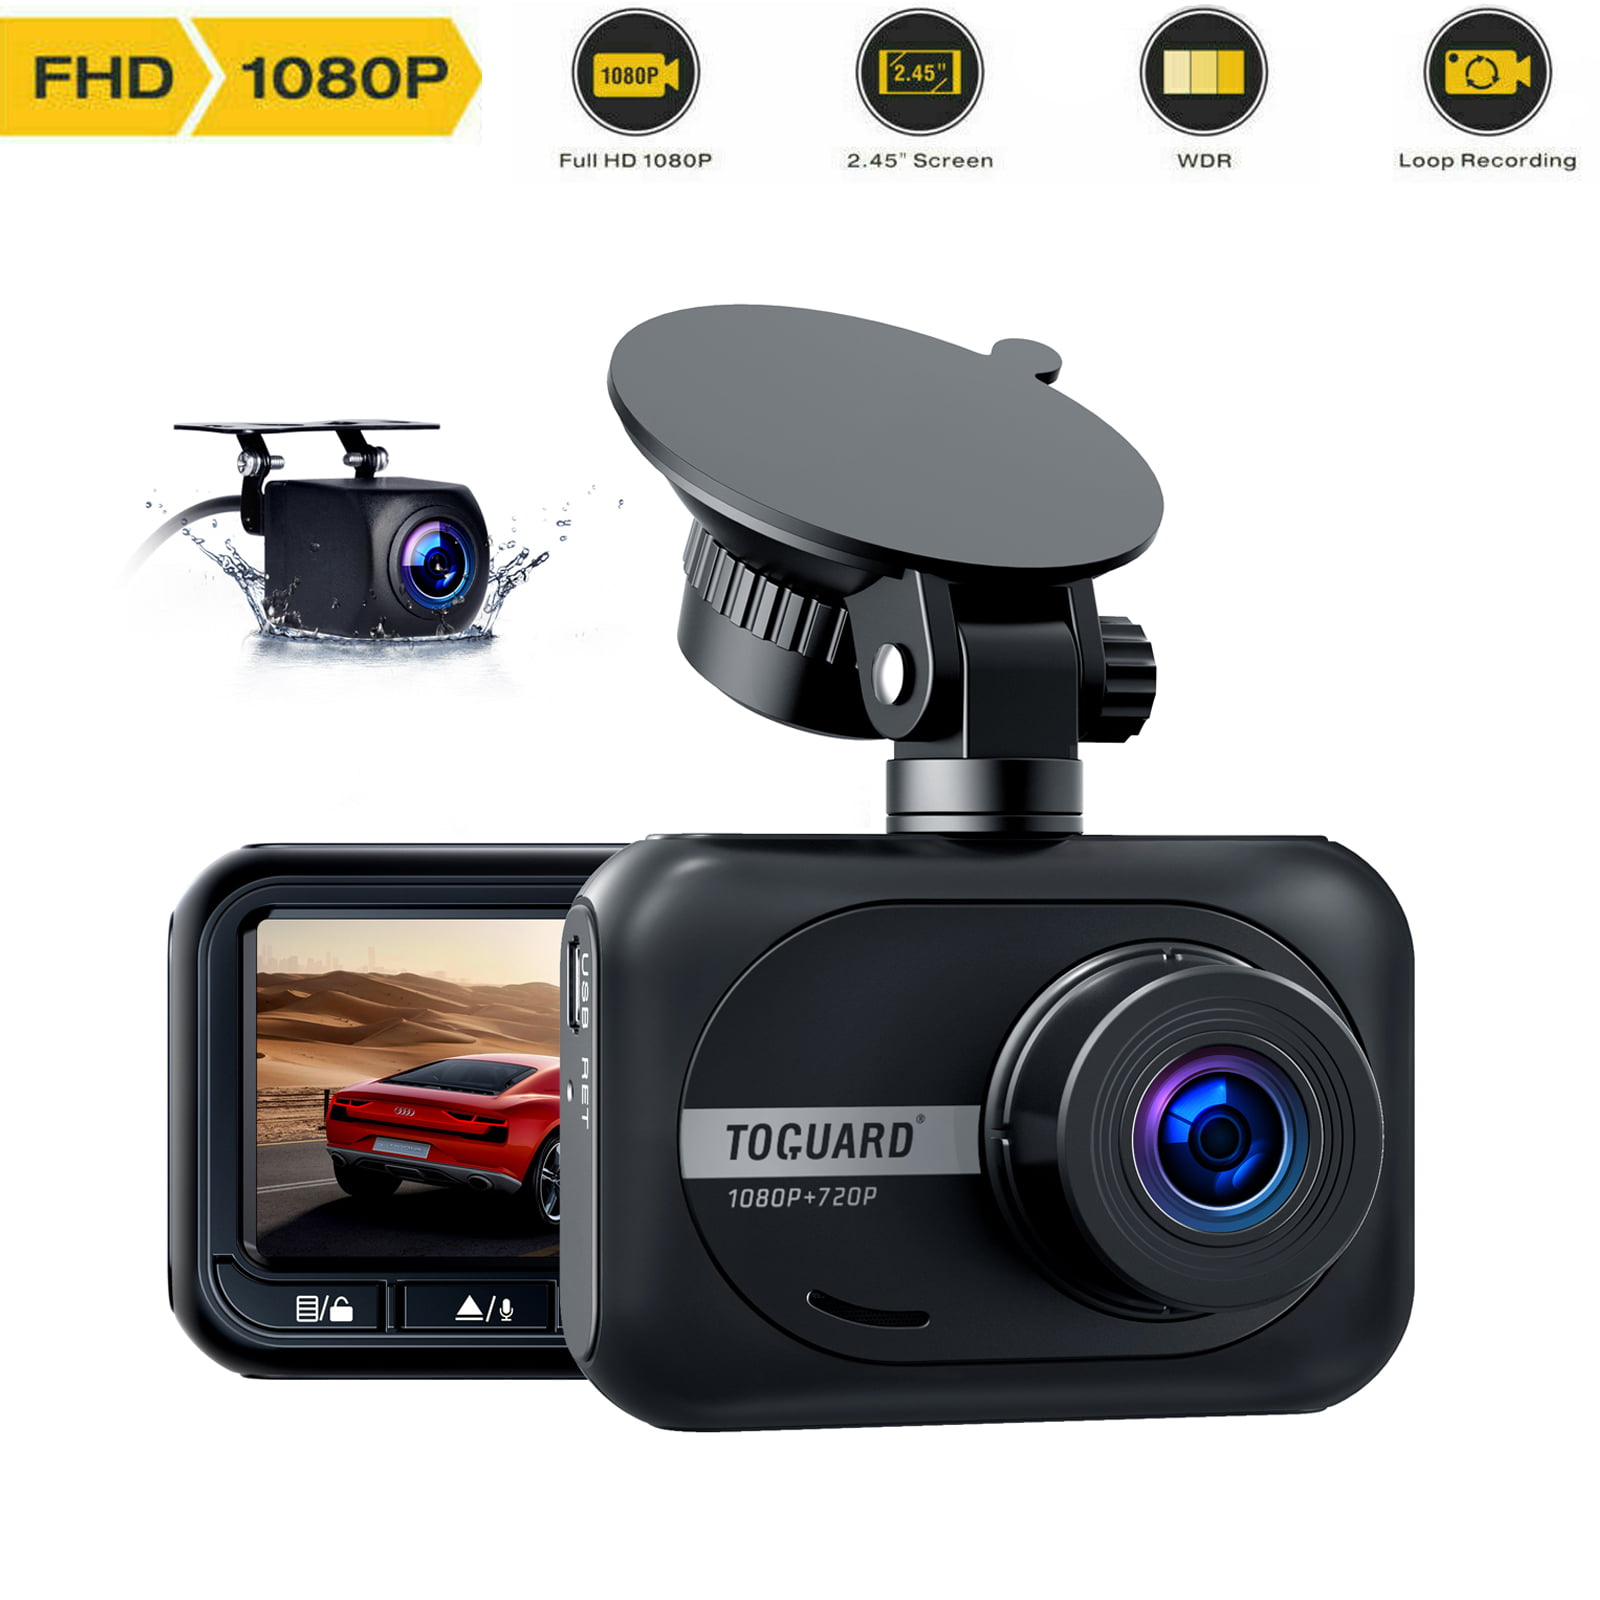 HD 1080P Front and 720P Inside Cabin Dash Camera TOGUARD Dual Dash Cam with IR Night Vision 1.5 inch LCD Screen 310° Wide Angle Dual Lens Car Driving Recorder for Uber Cars Truck Taxi 